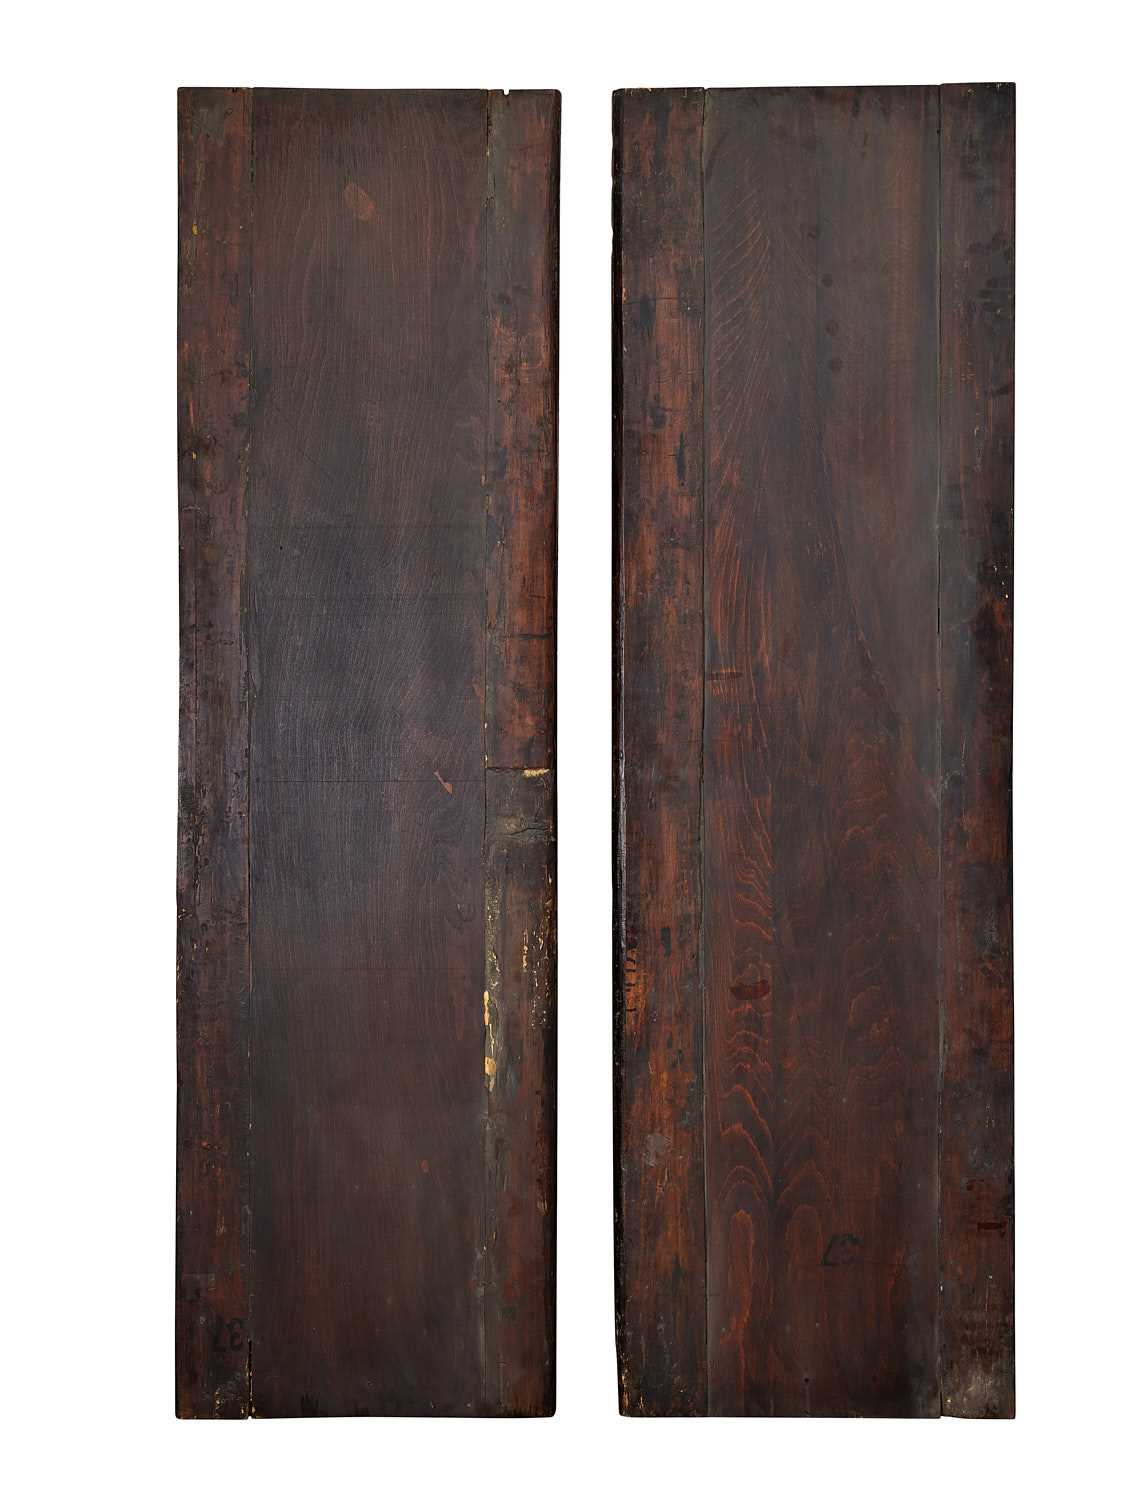 A PAIR OF MAMLUK CARVED WOOD DOORS, EGYPT, 15TH CENTURY AND LATER - Image 2 of 2